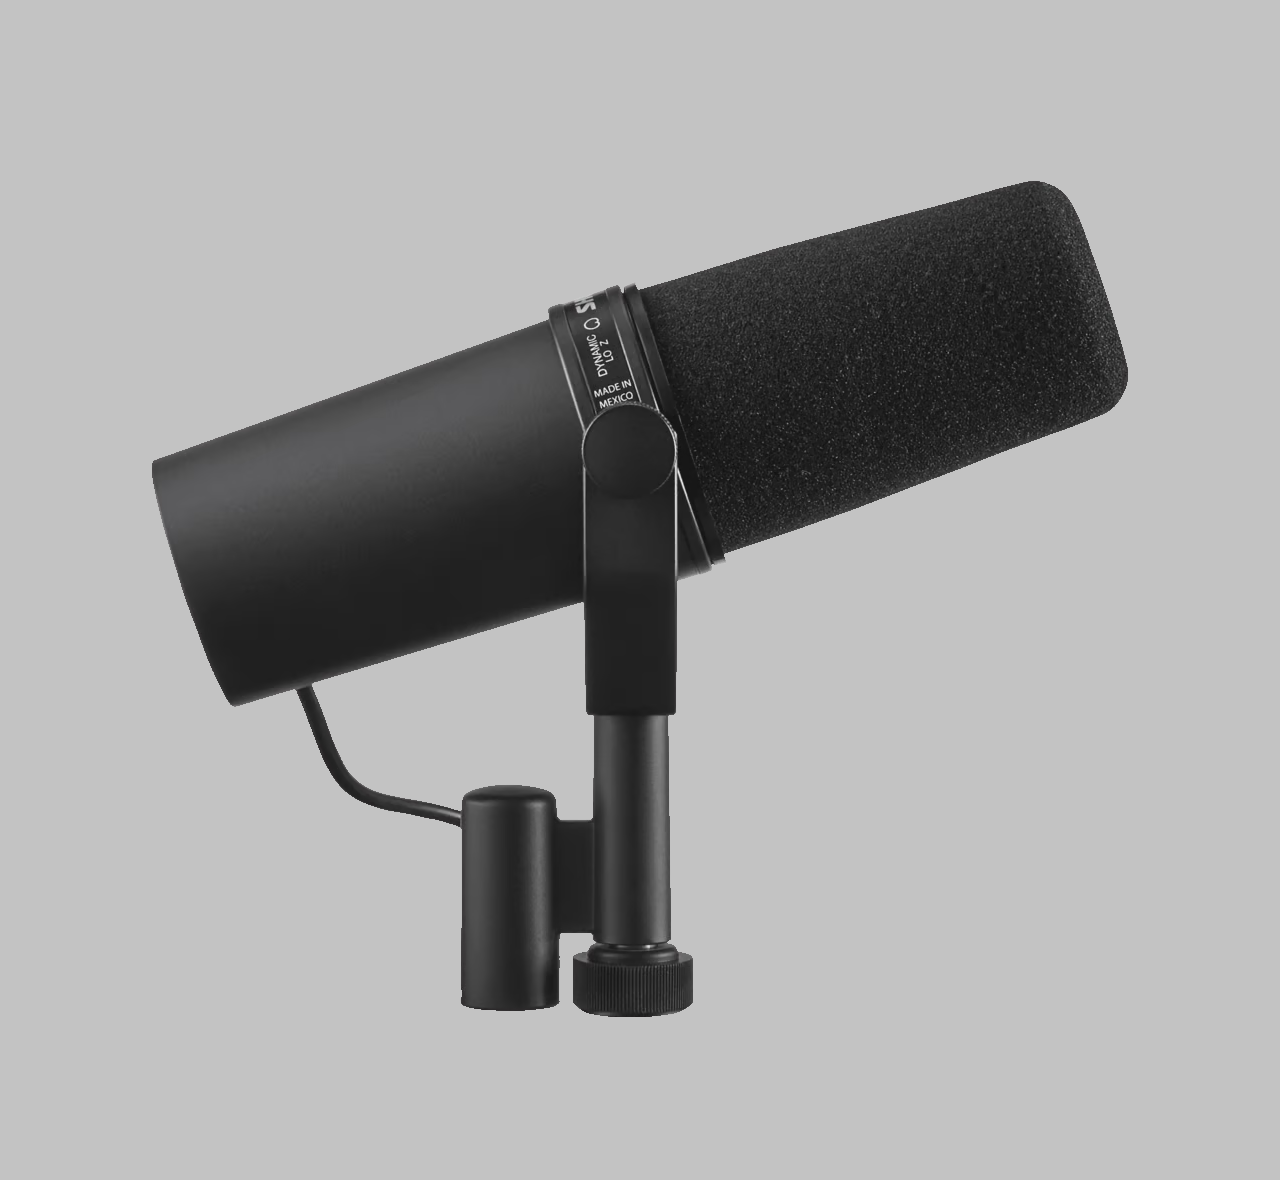 SM7 vs SM7B: SM7B's highly effective pop filter eliminates need for any add-on protection against explosive breath sounds, even for close-up vocals.